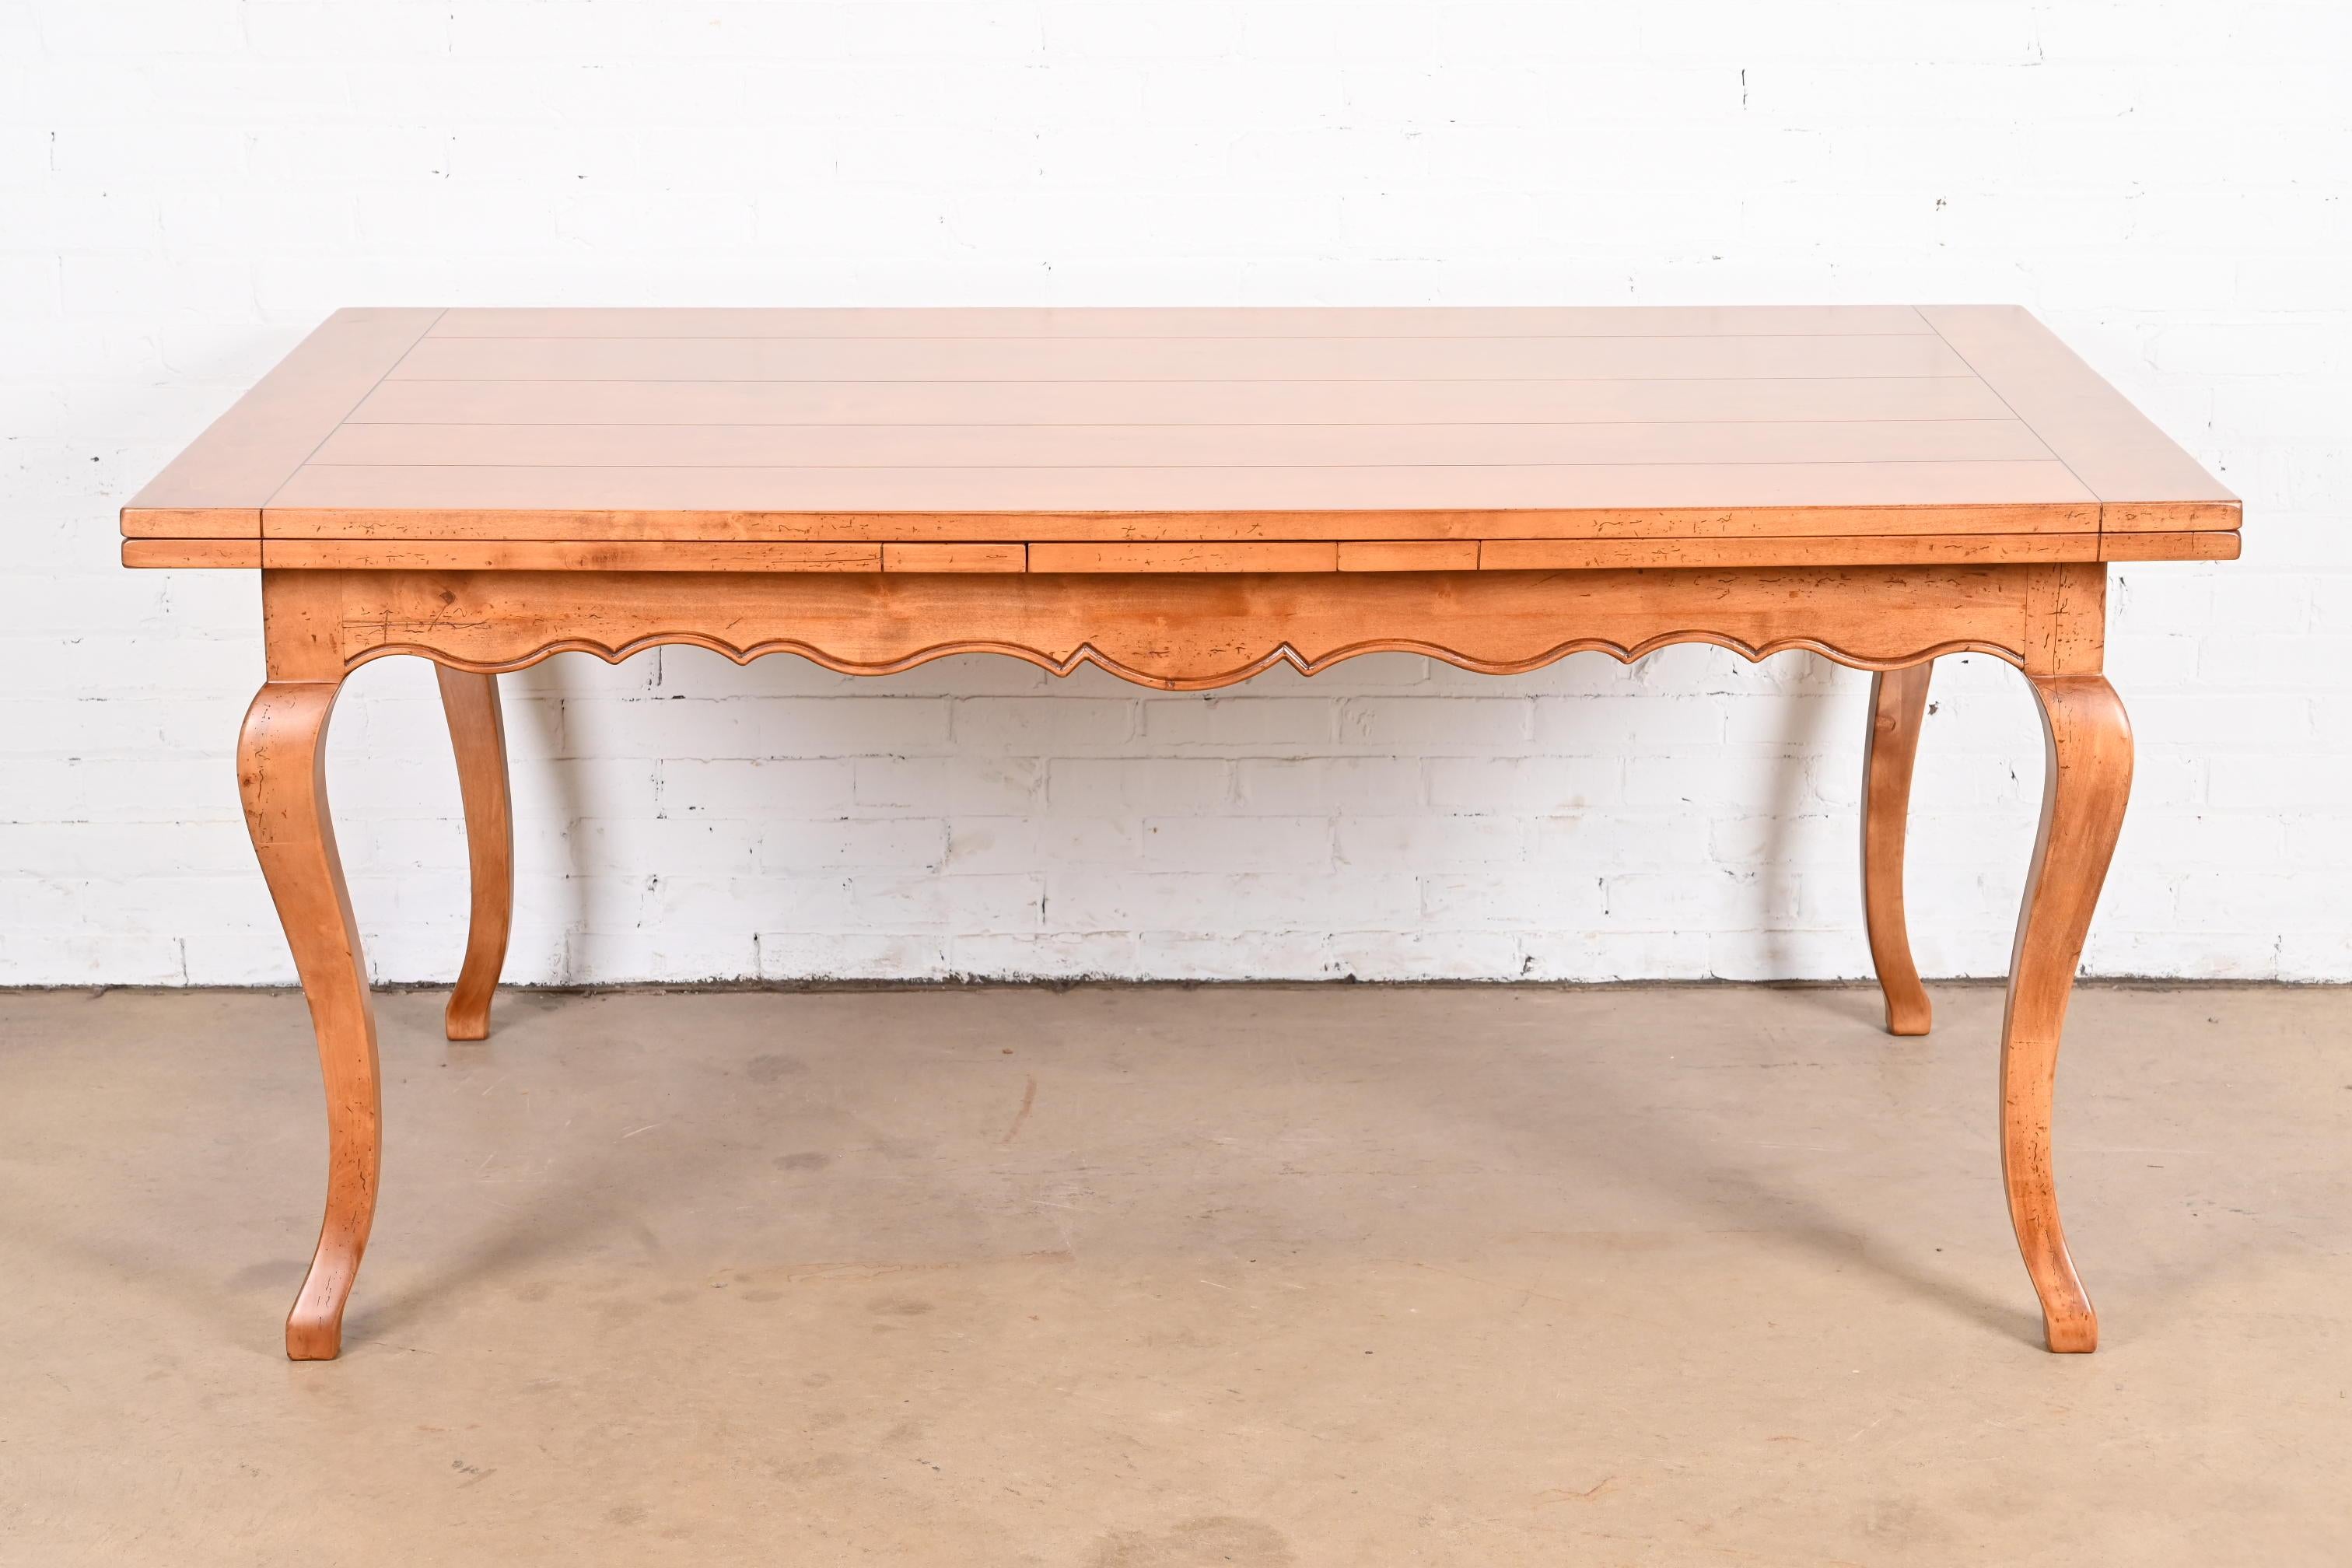 An exceptional Italian Provincial or French Country maple extension harvest farmhouse dining table

By Baker Furniture, 